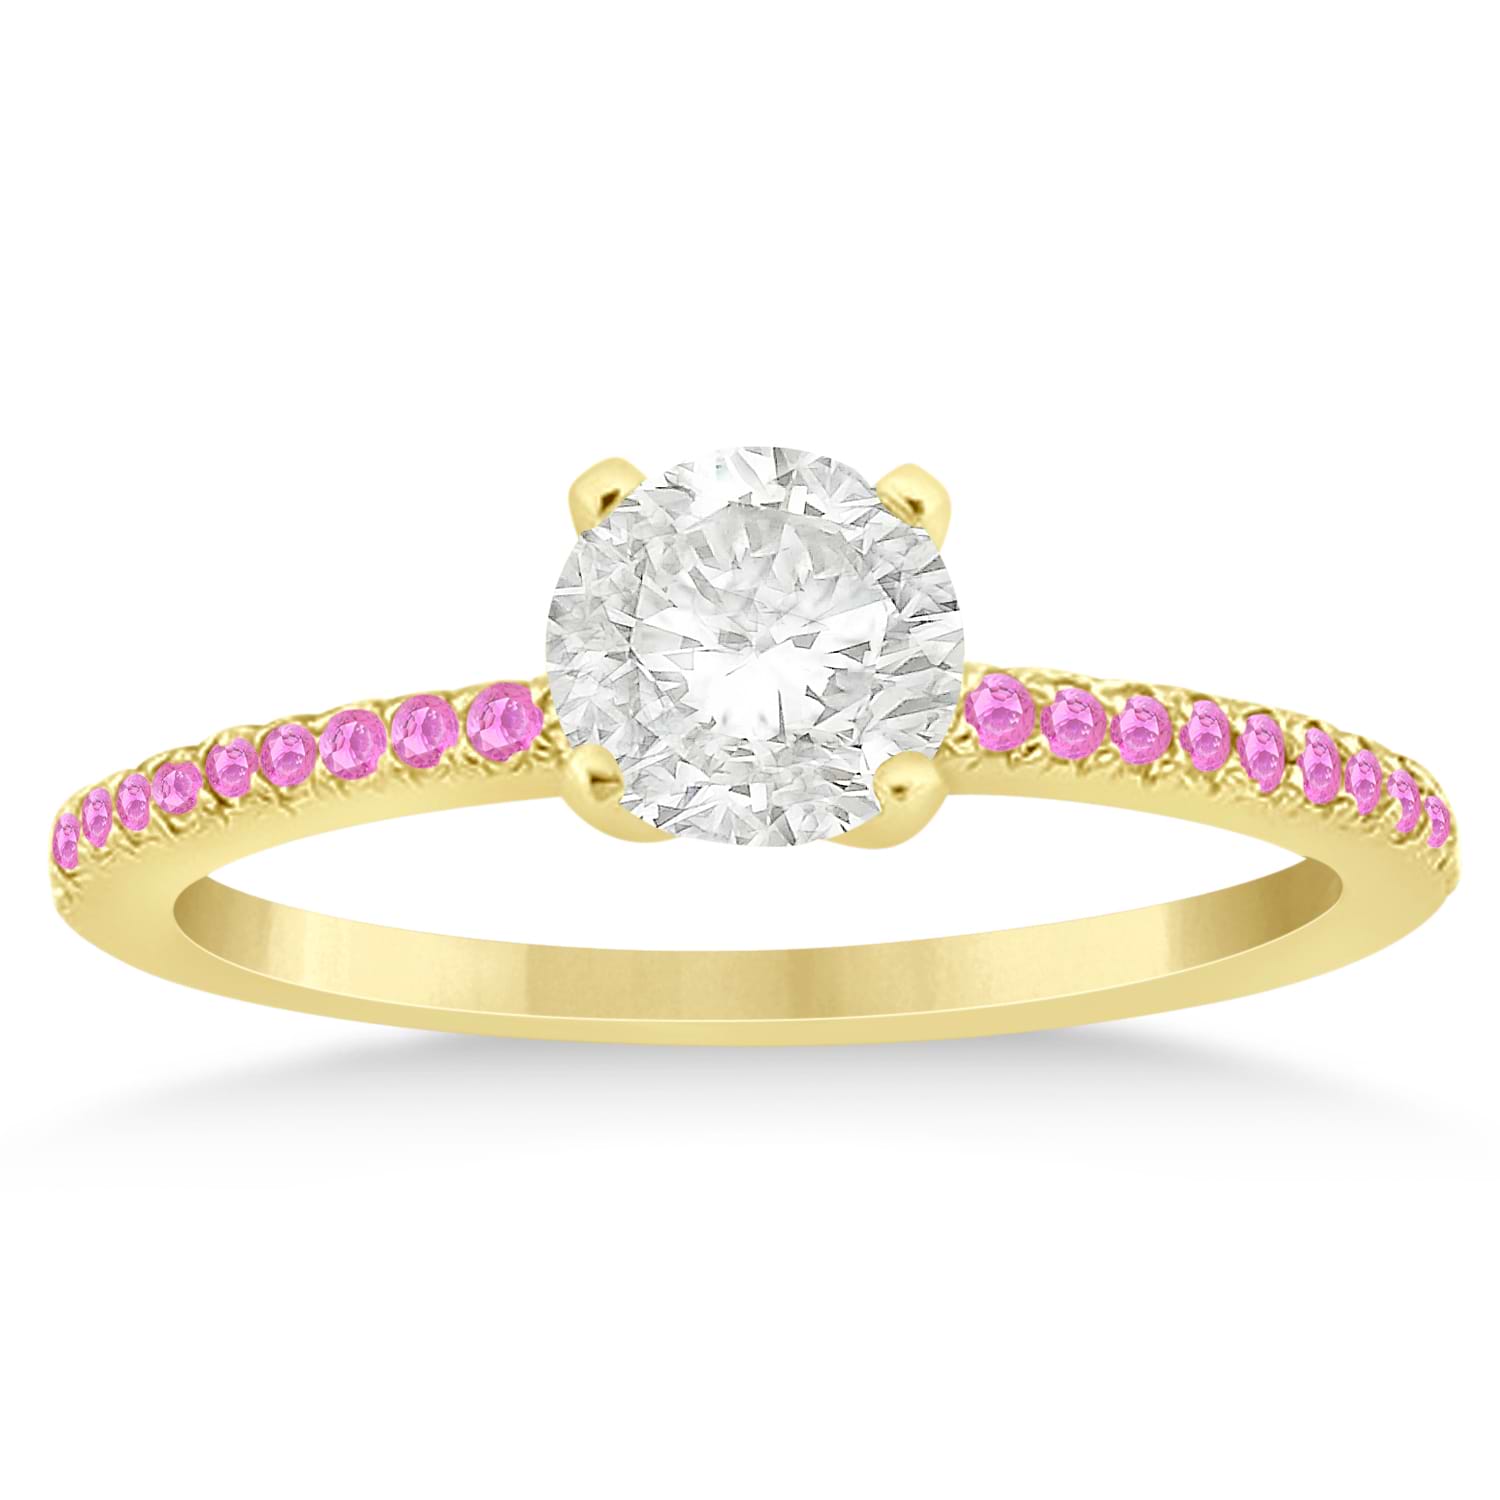 Pink Sapphire Accented Engagement Ring Setting 18k Yellow Gold 0.18ct